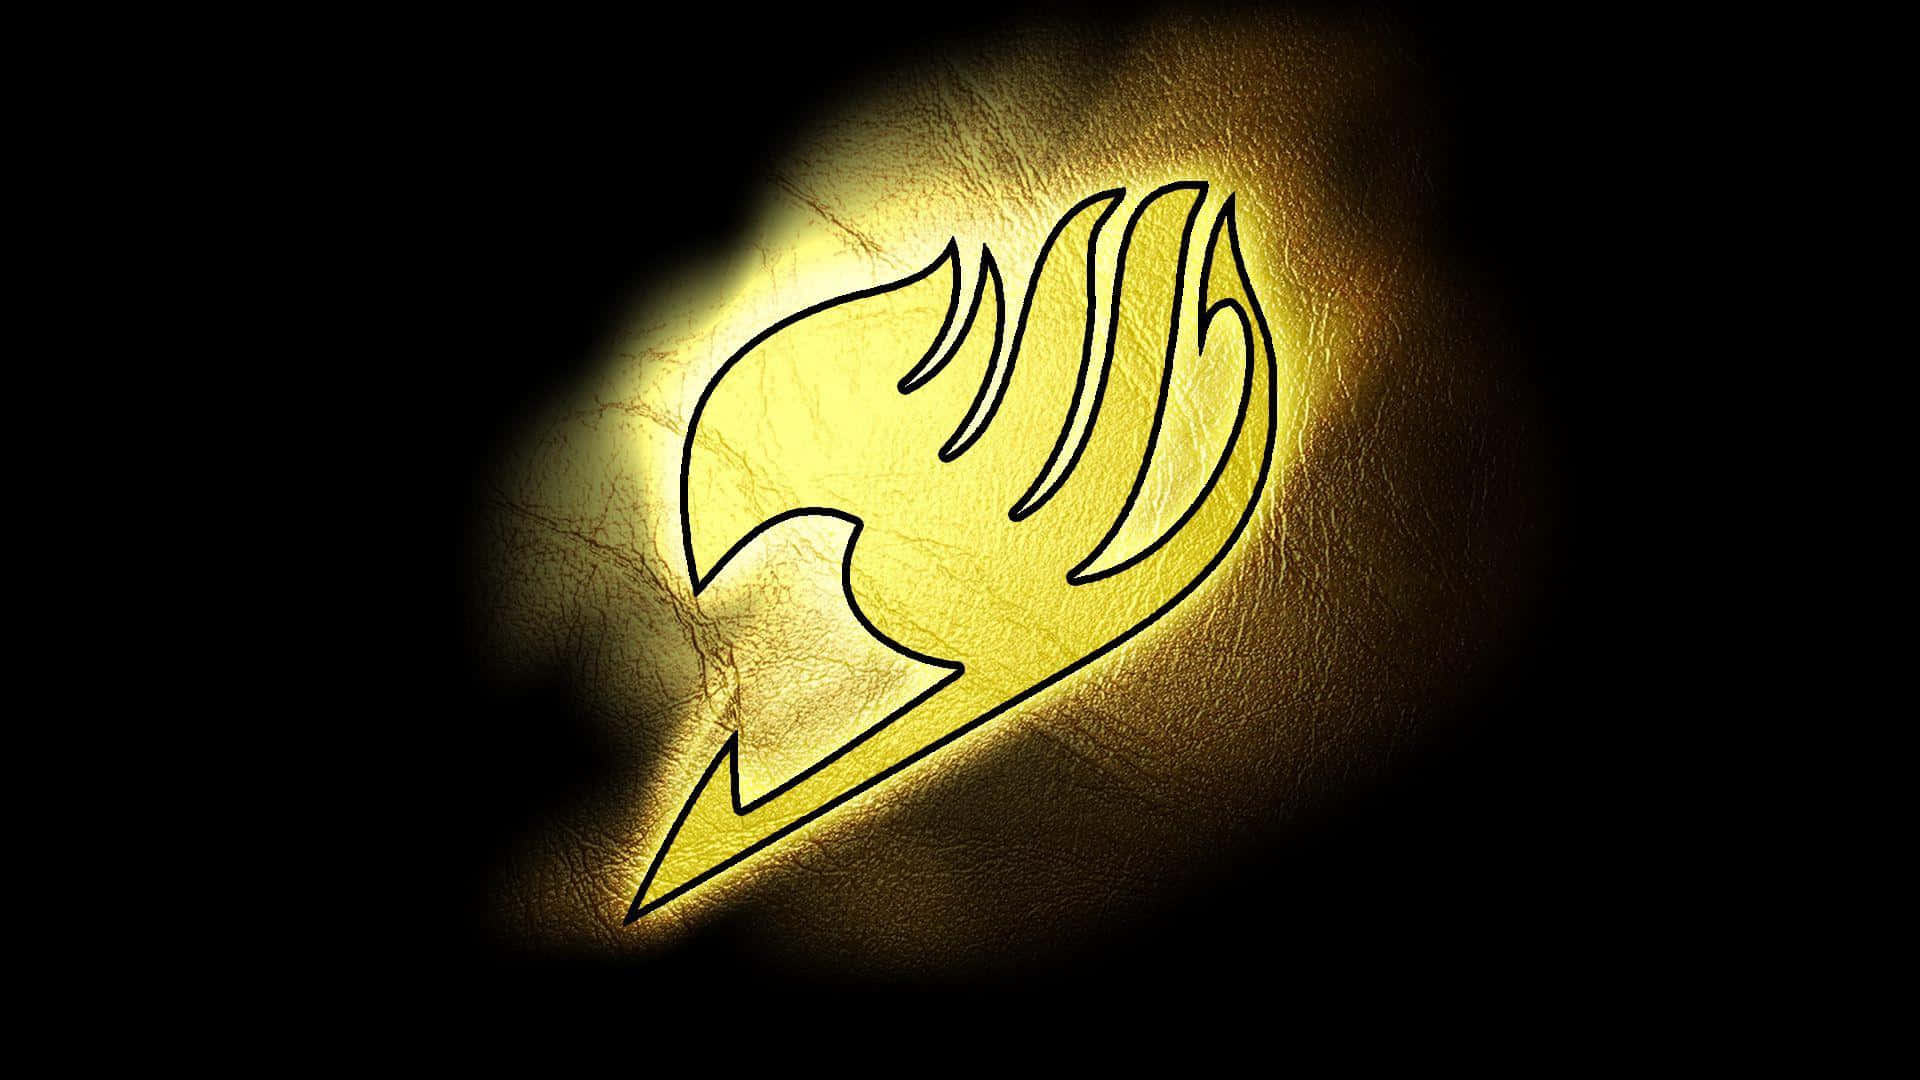 Official Emblem of the Fantasy Adventure Series "Fairy Tail" Wallpaper